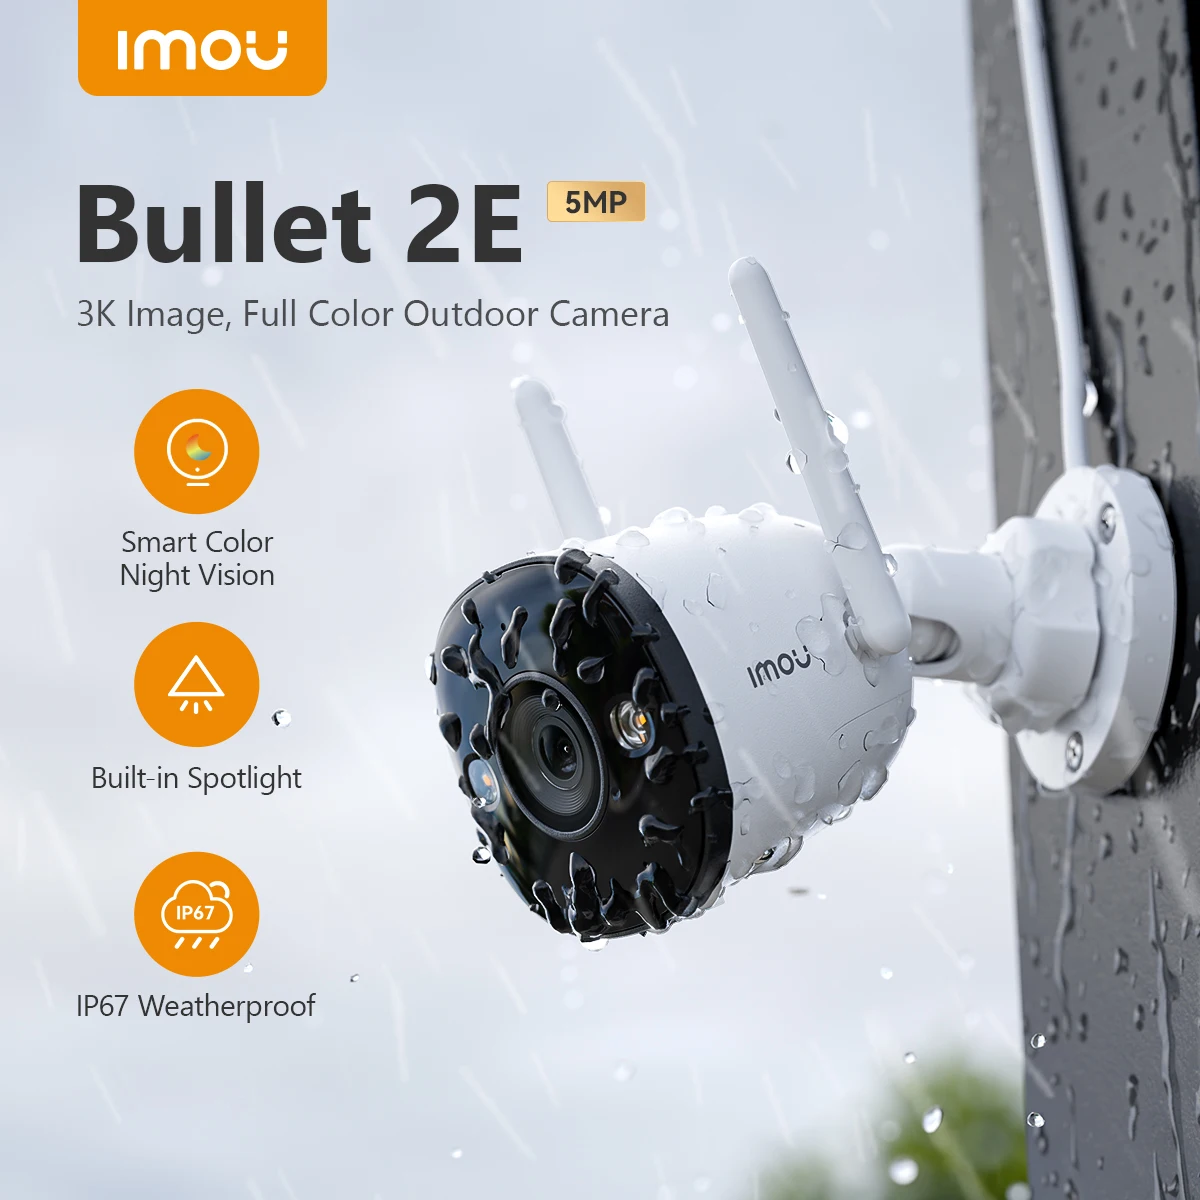 IMOU Camera IP WiFi Bullet 2E 5MP Outdoor IP67 Smart Human Detection Camera Security Protection